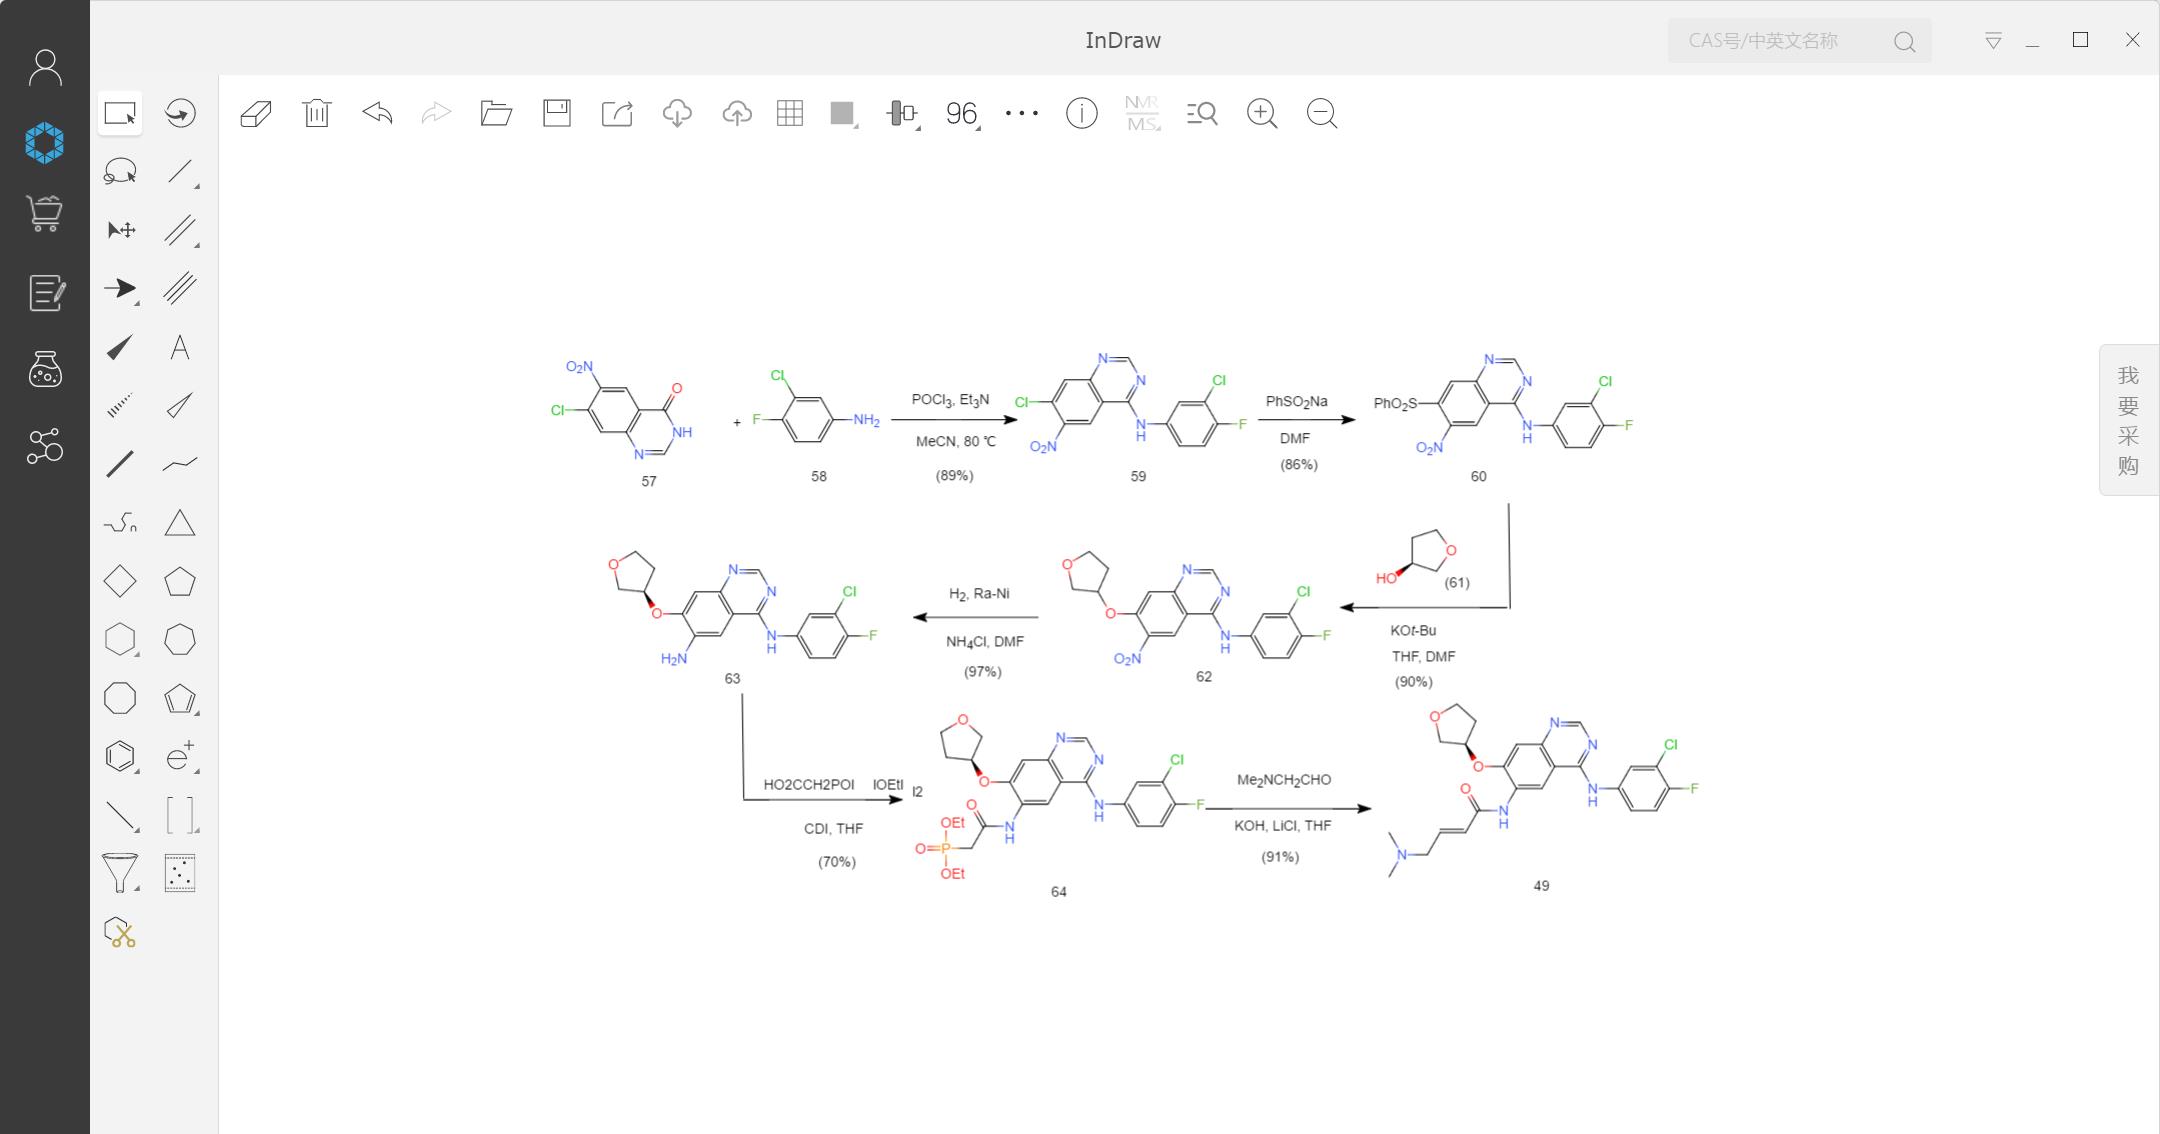 nDraw supports drawing complex chemical structures and reactions